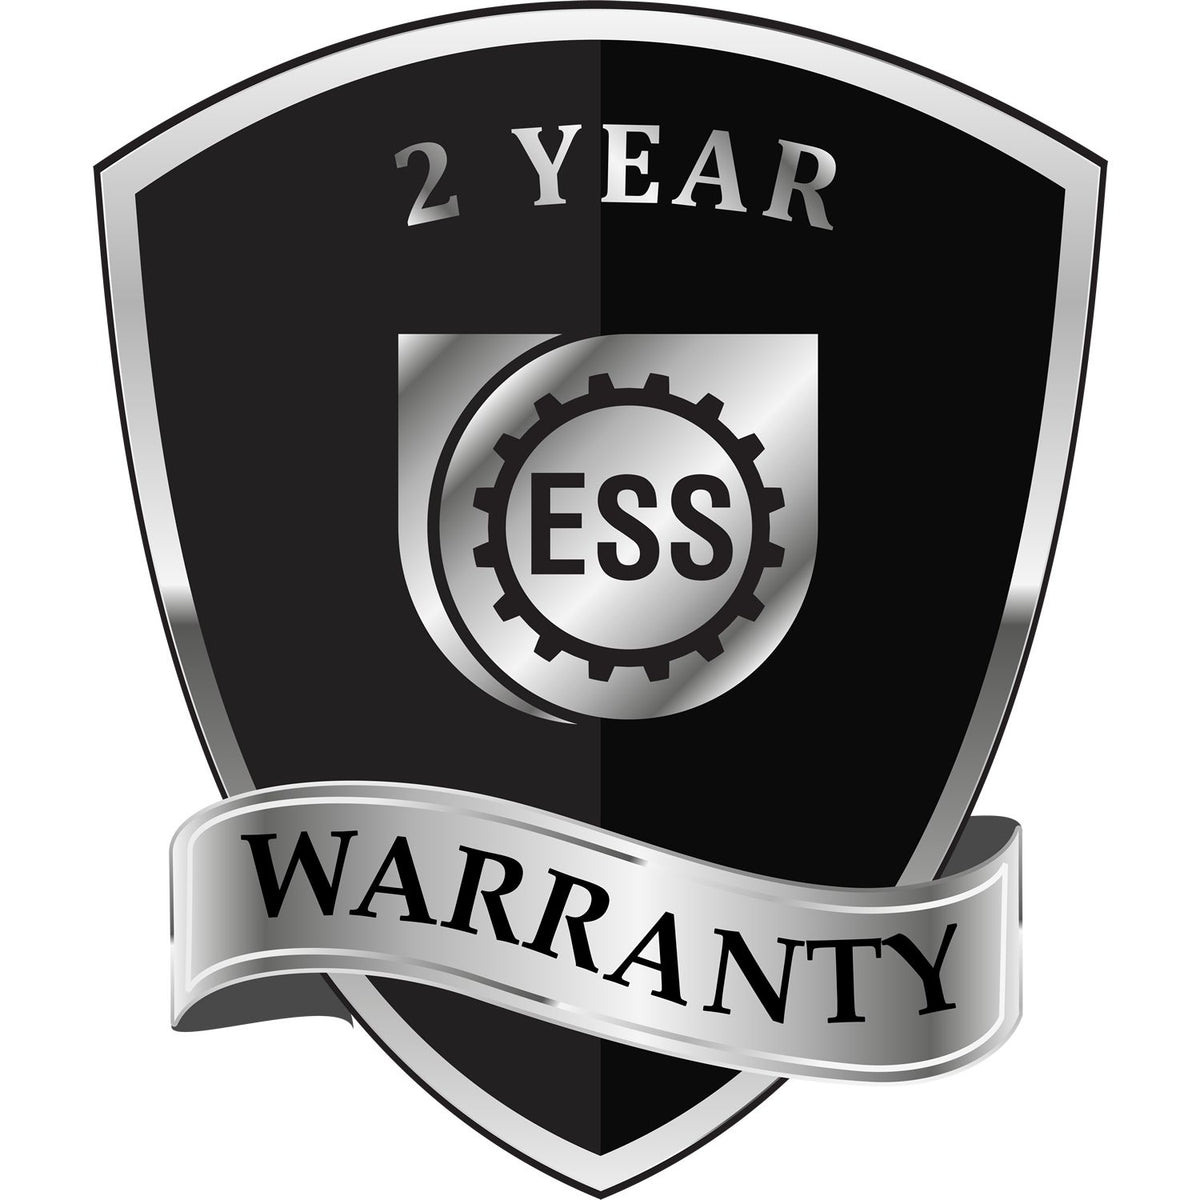 A black and silver badge or emblem showing warranty information for the Gift Florida Engineer Seal